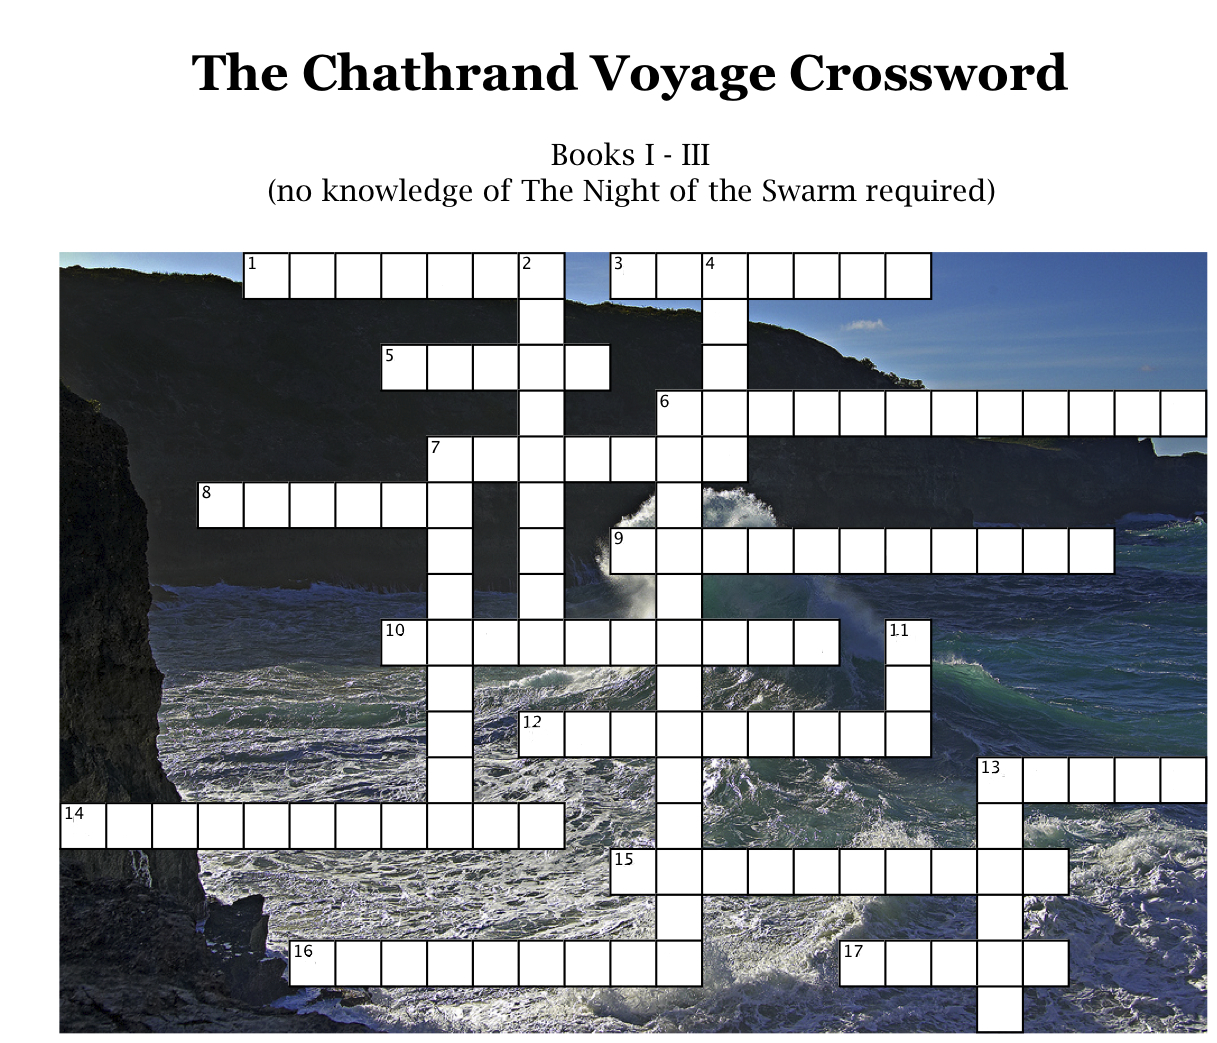 Letters from Alifros: The Chathrand Voyage Crossword Puzzle.